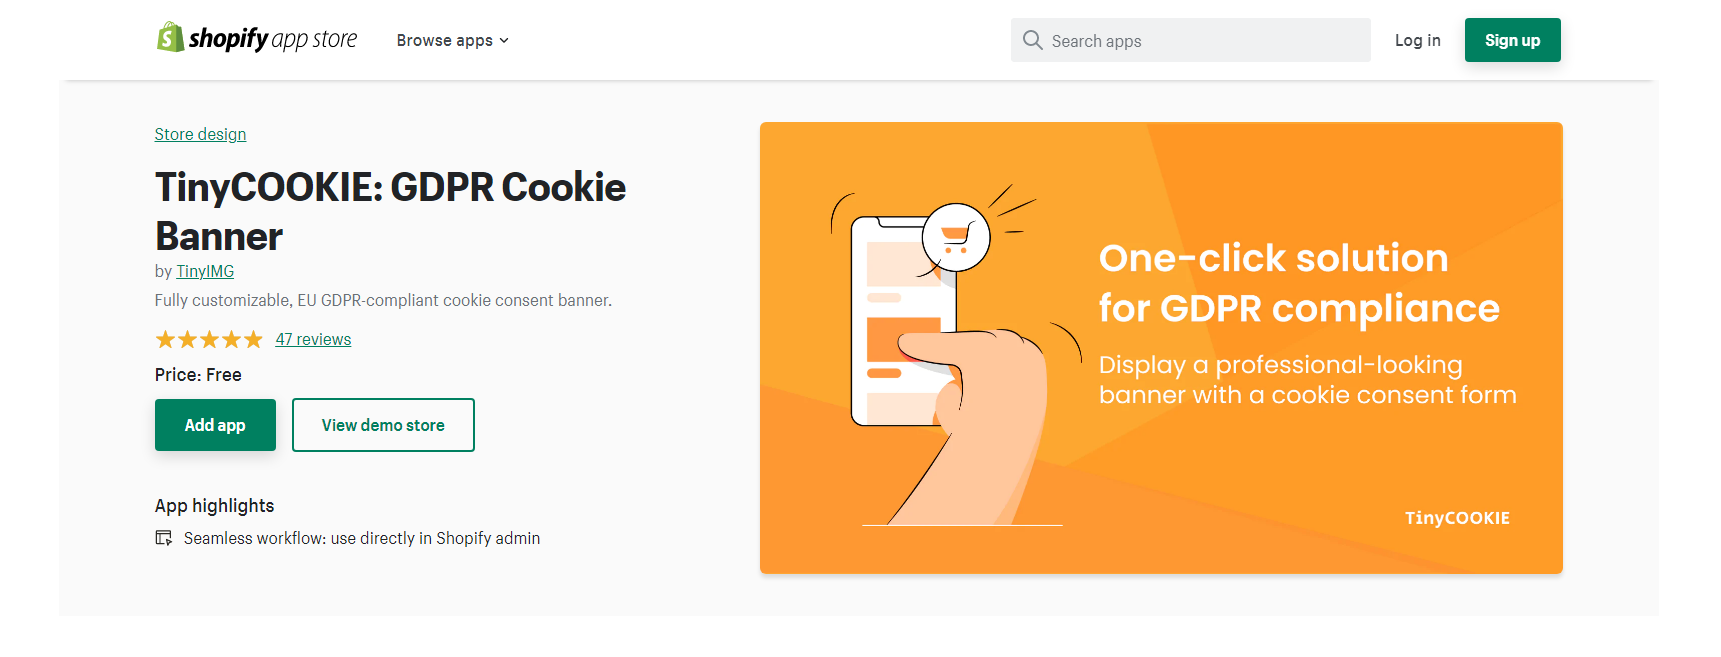 TinyCookie Banner - Shopify cookie apps